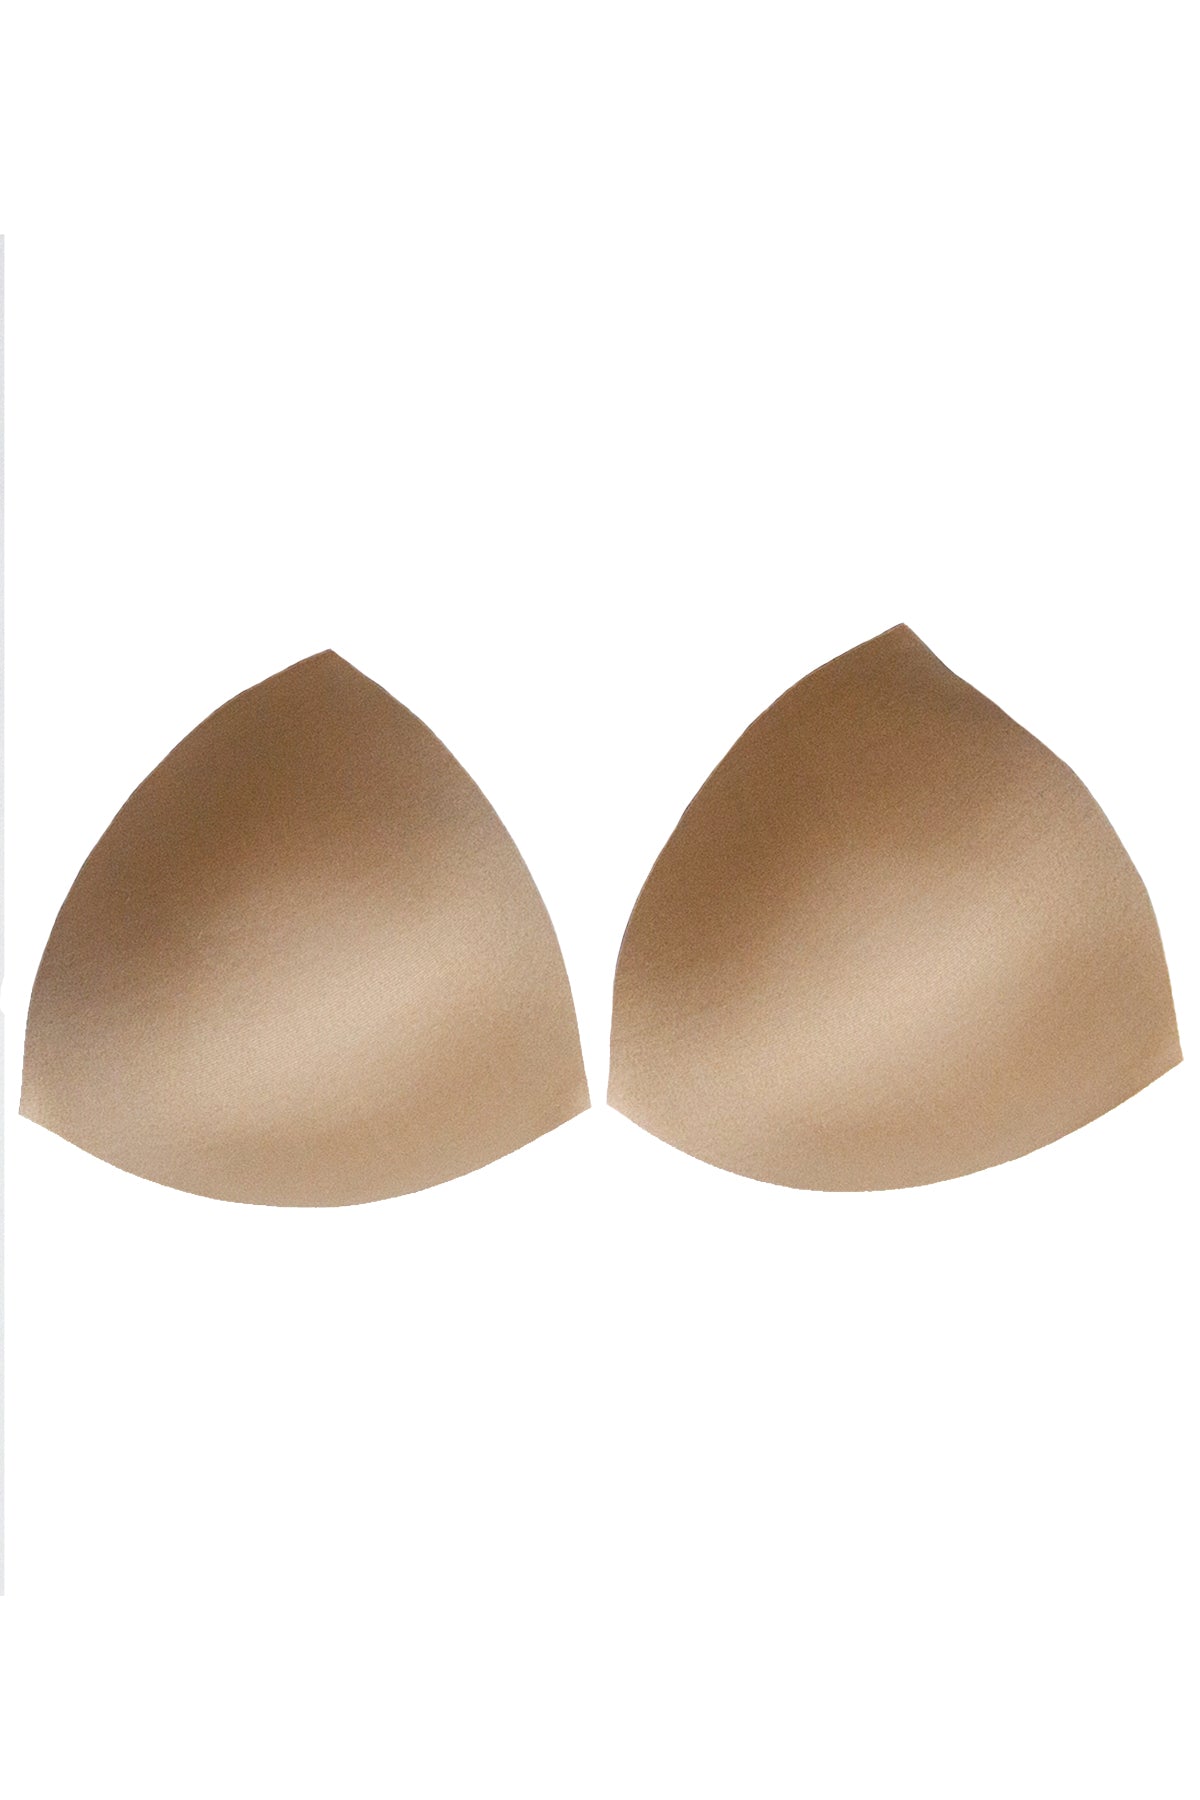 Double Scoop Bra Inserts, Bra Pads Inserts made with Ghana